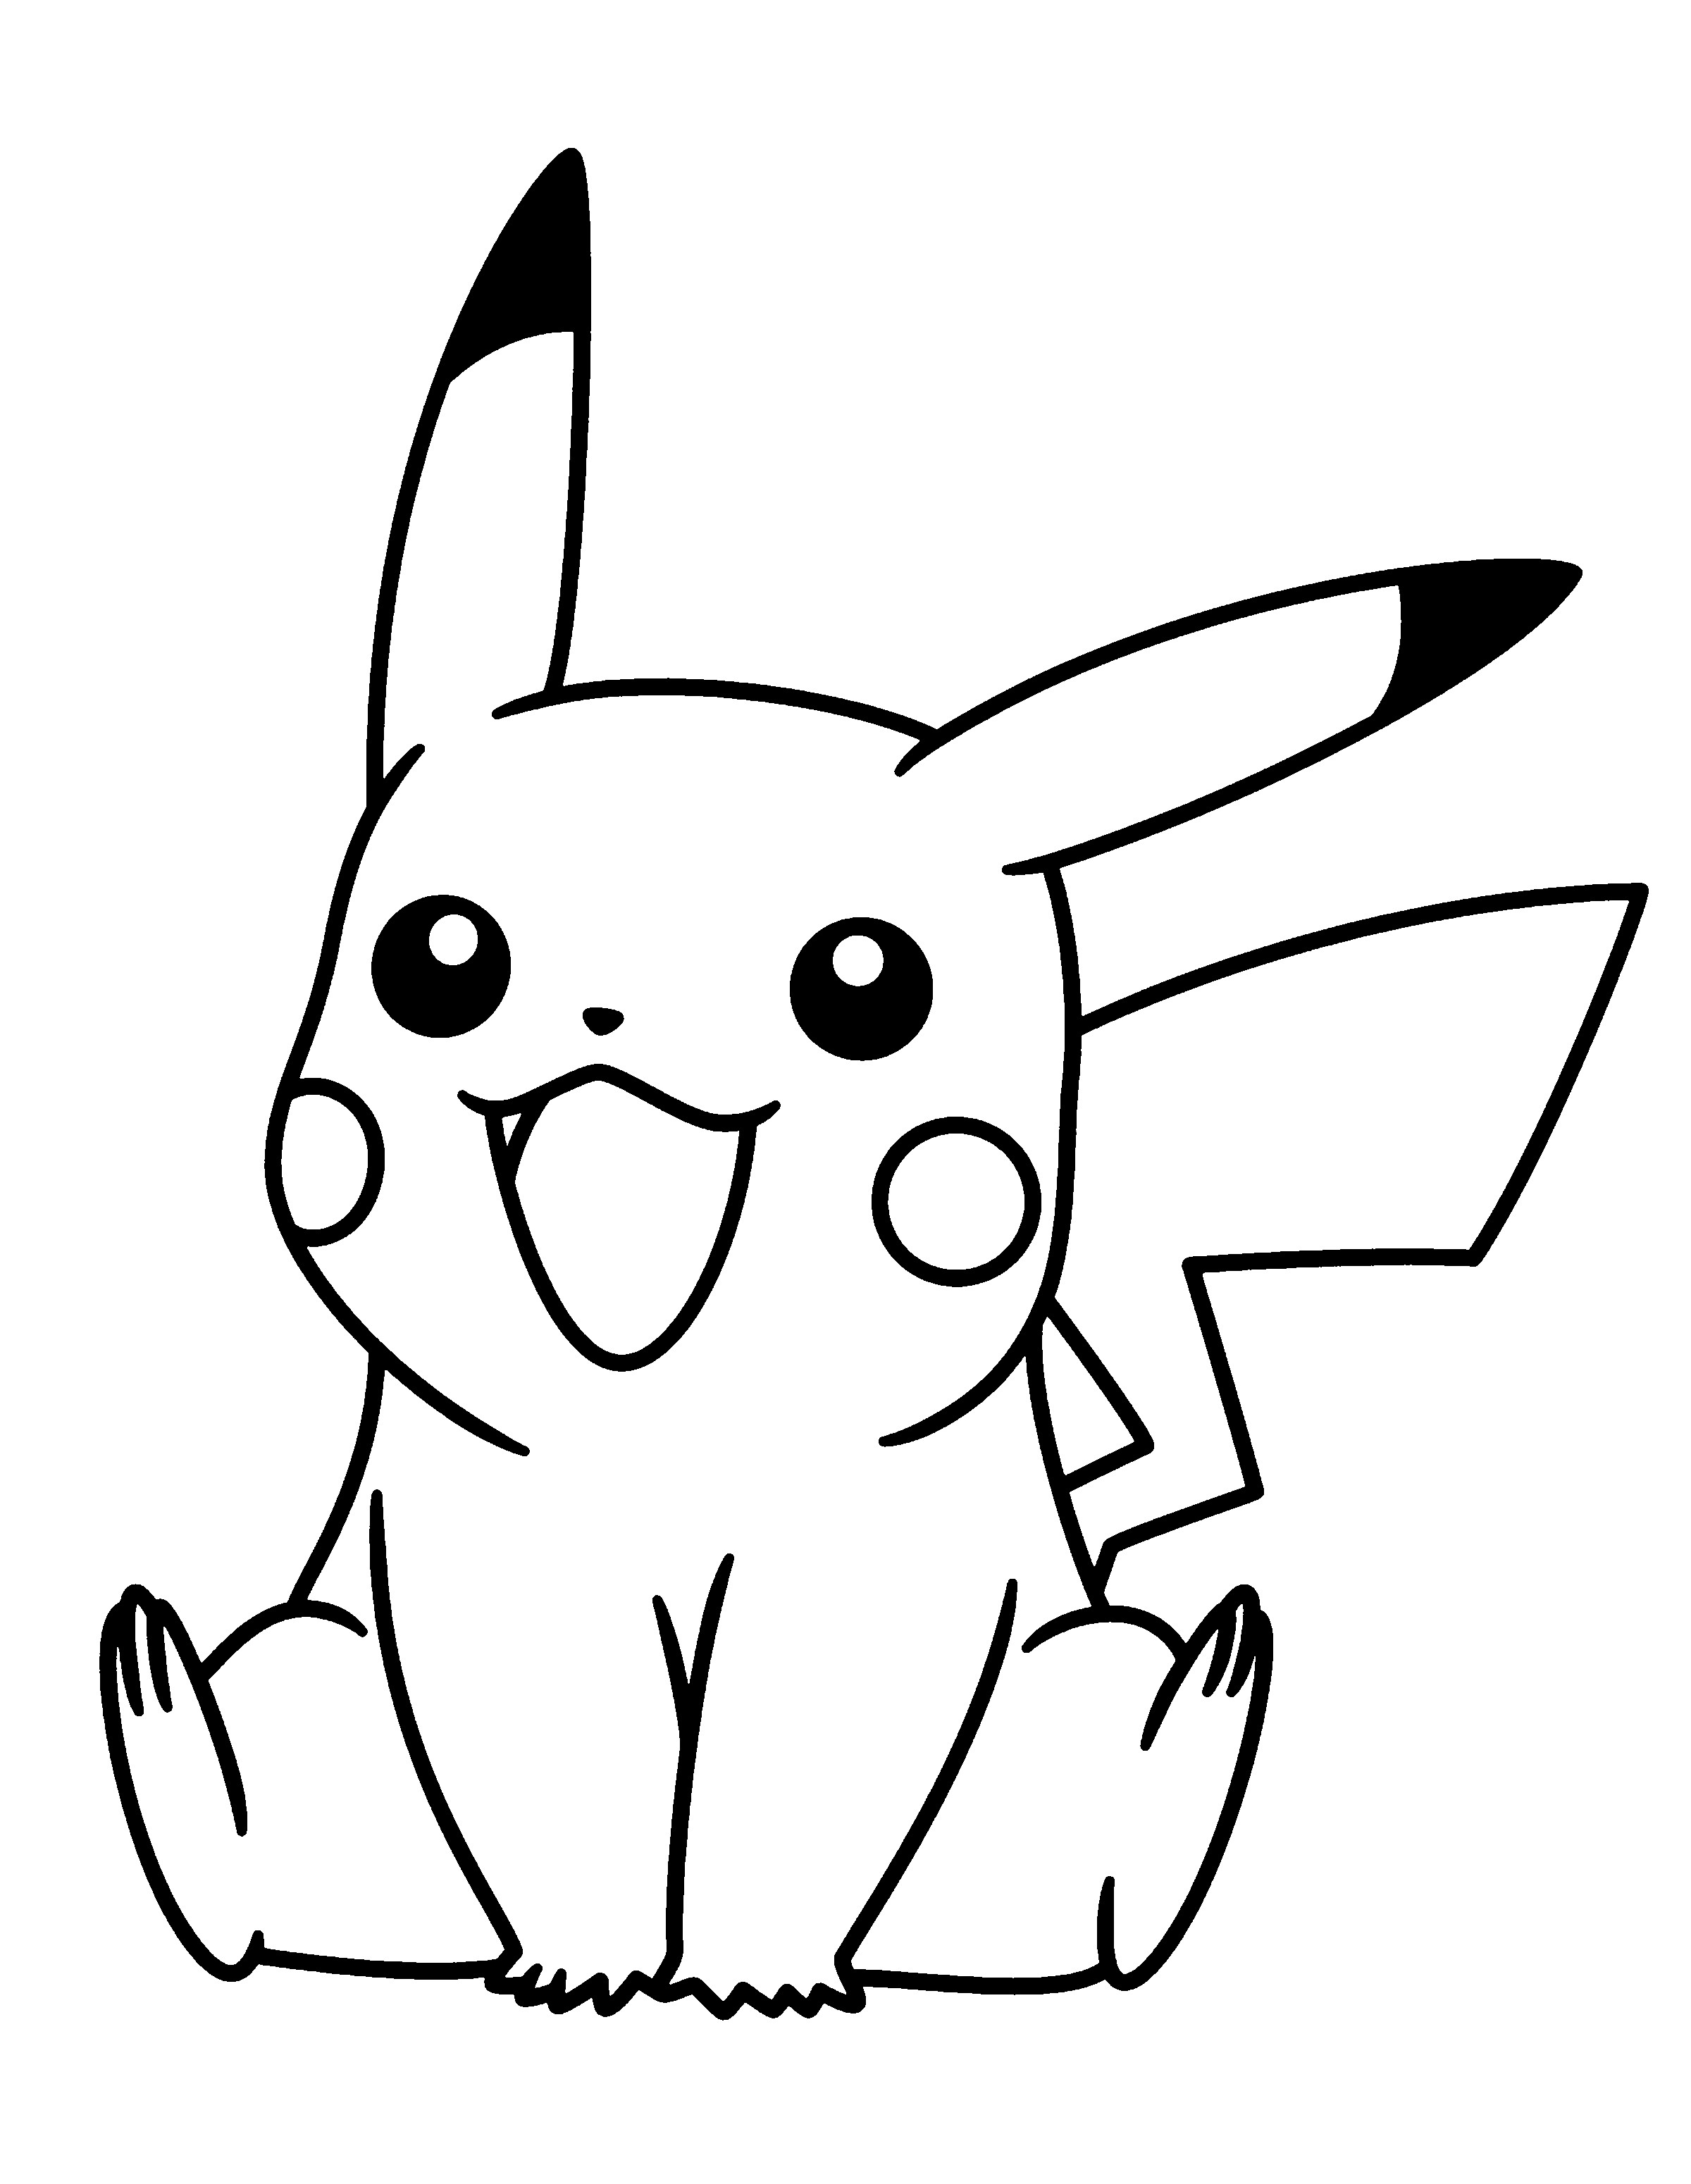 Inspirational free pokemon pikachu coloring pages 1